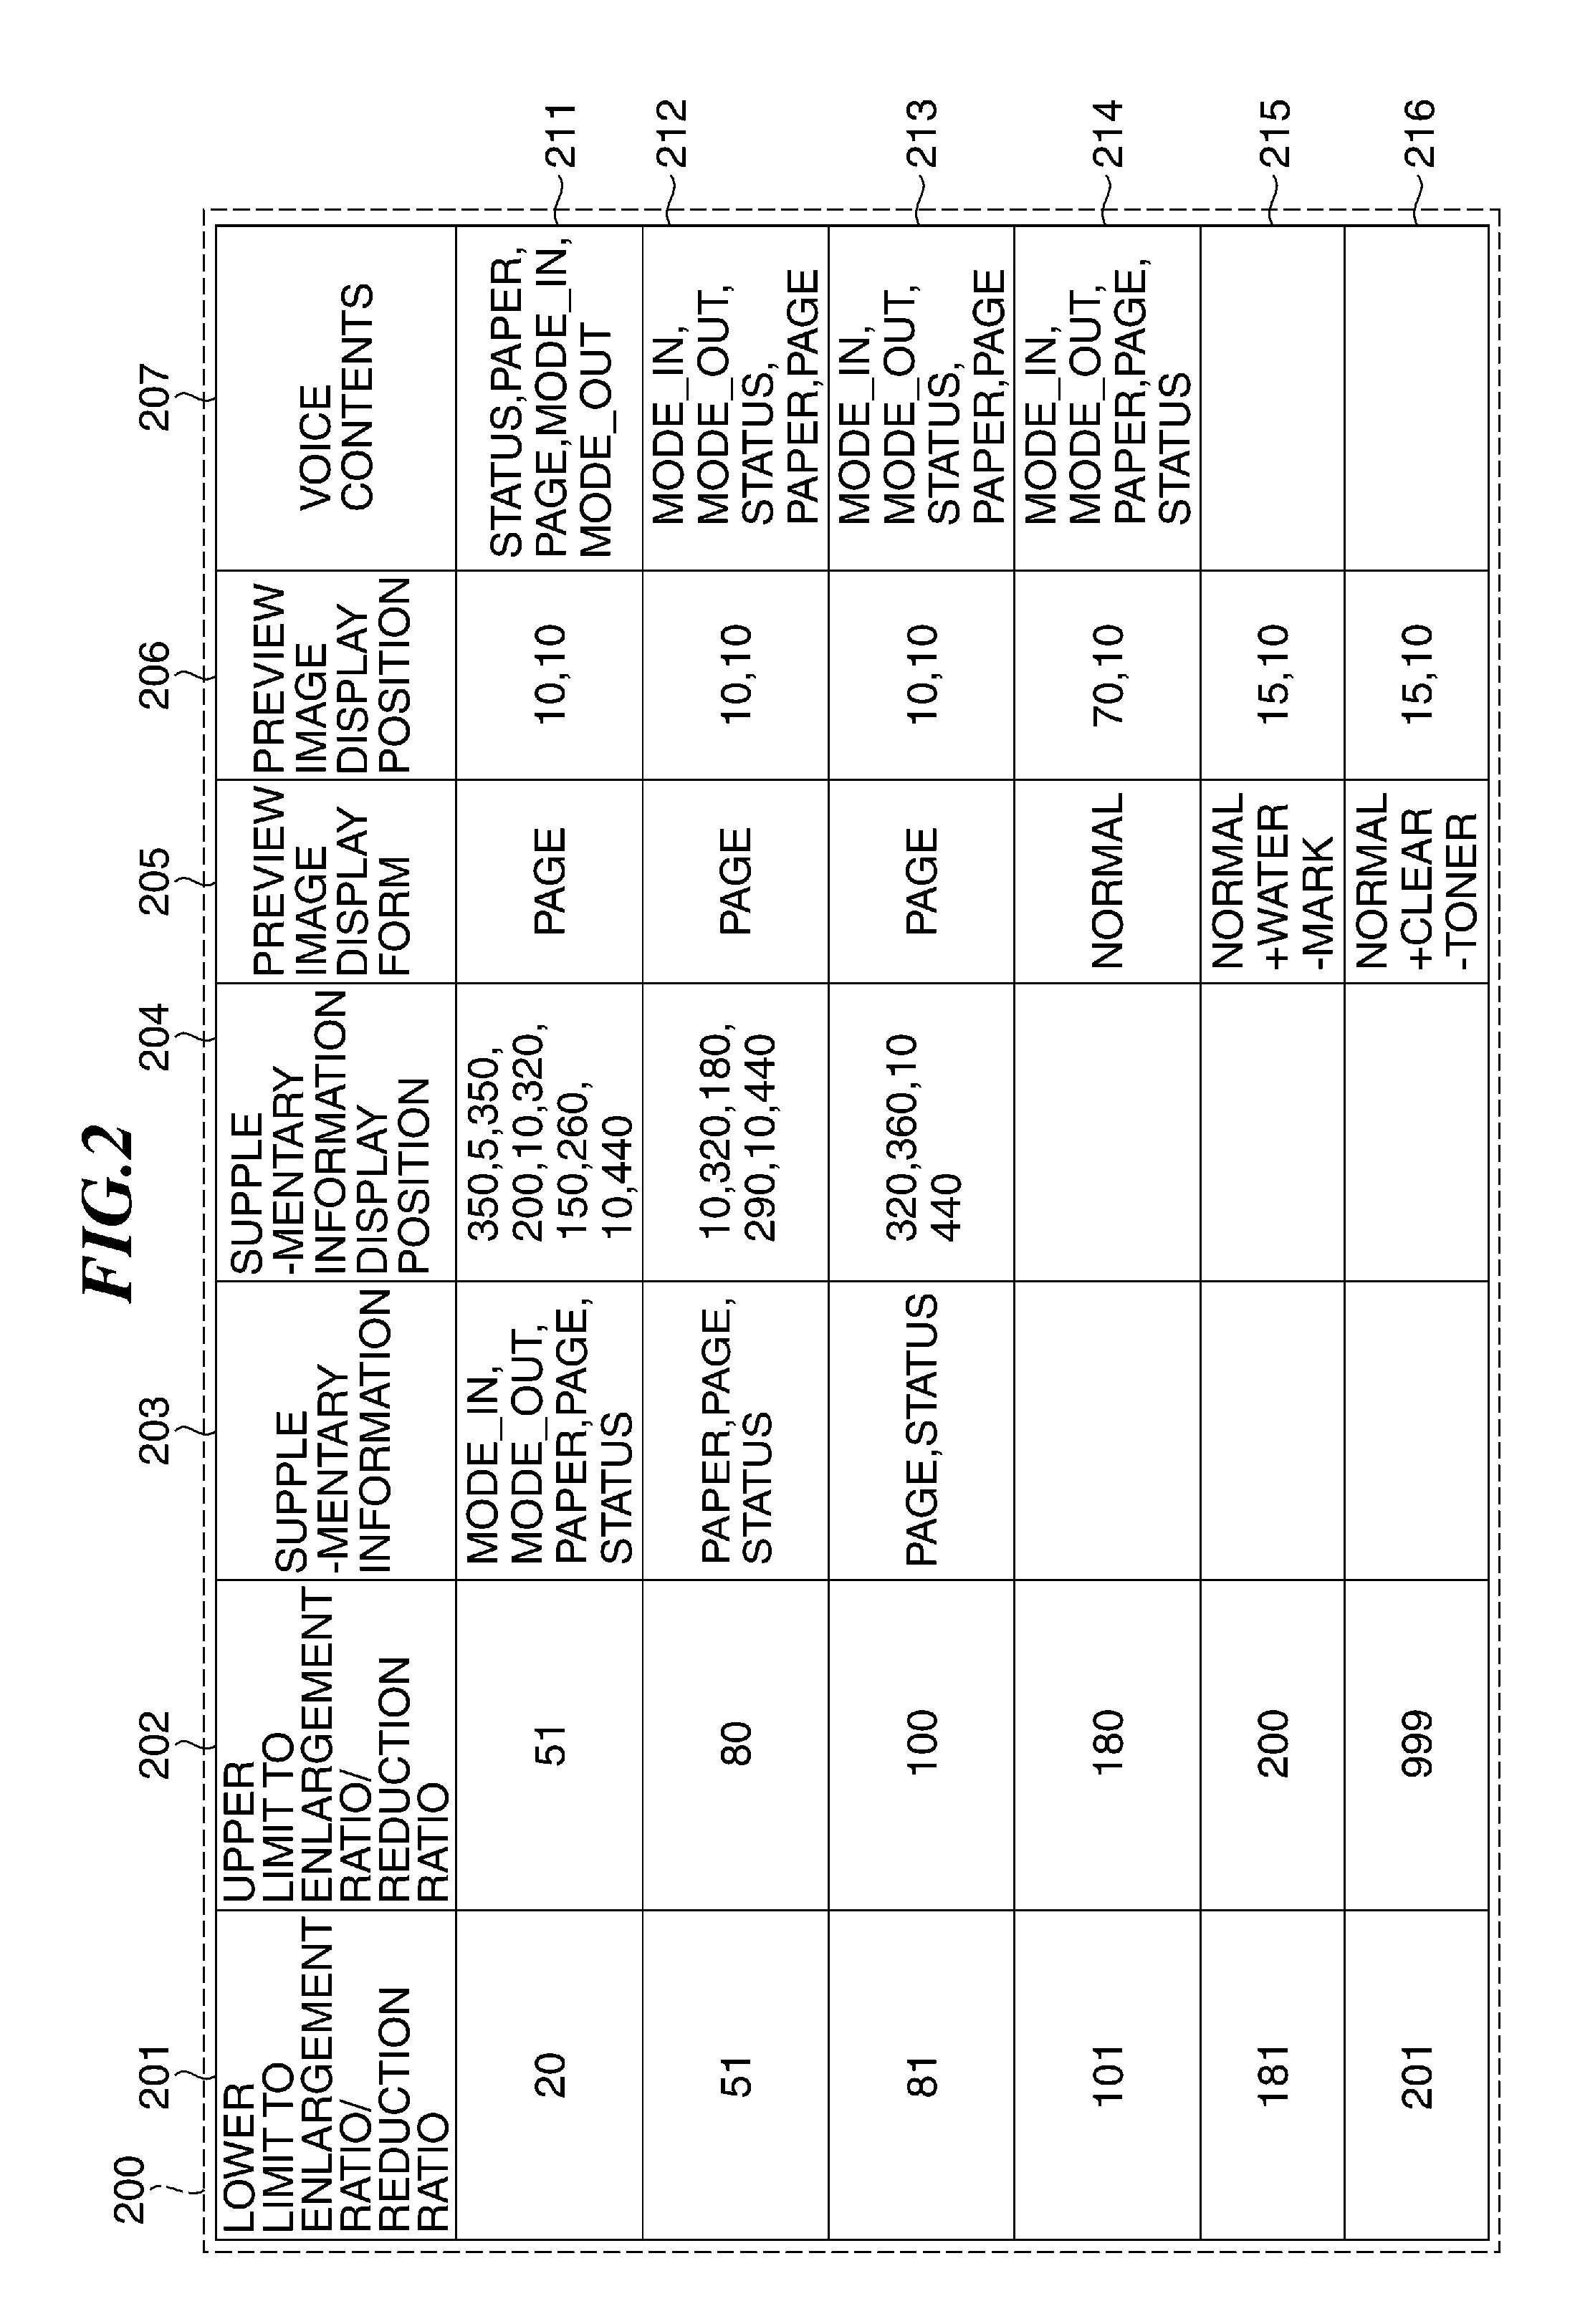 Image display apparatus that displays information according to size of preview image, control method for image display apparatus, and storage medium